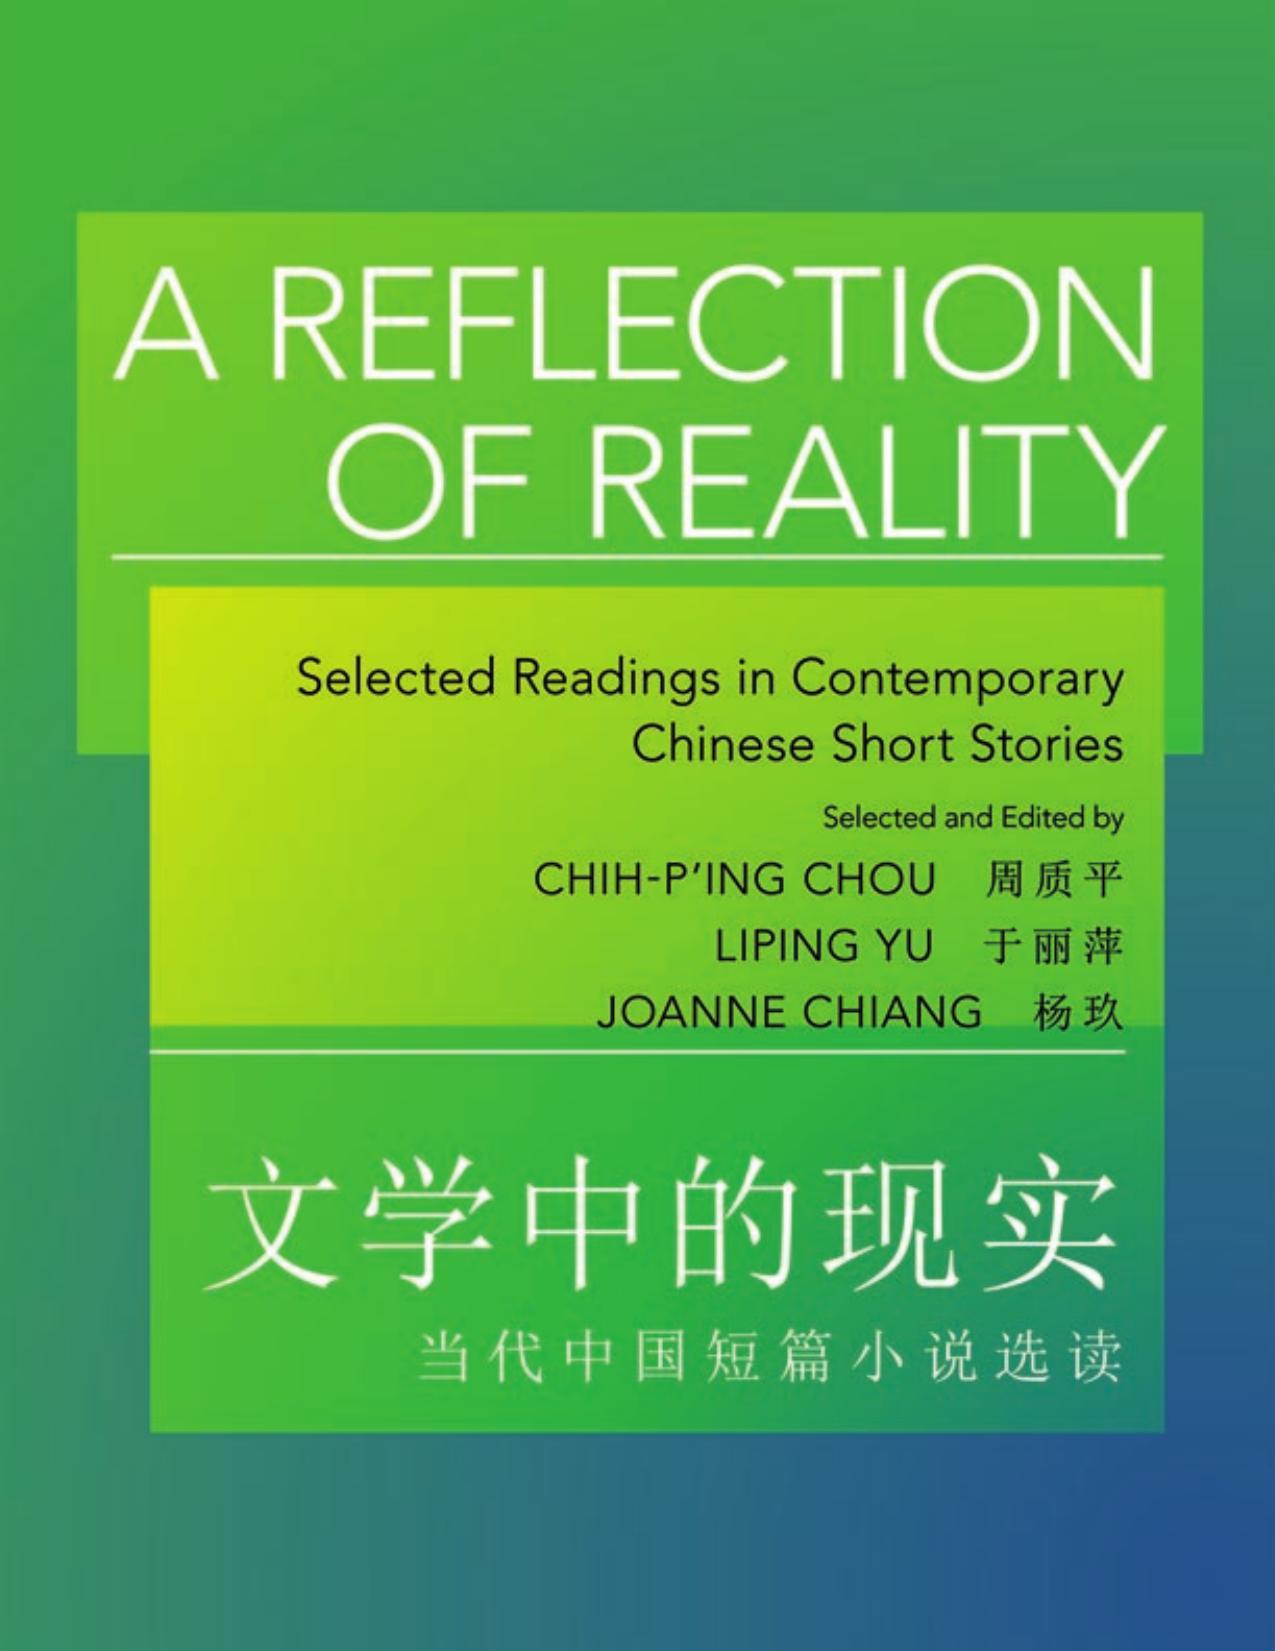 Reflection of Reality Selected Readings in Contemporary Chinese Short Stories by Chih-p ing Chou, Liping Yu , Joanne Chiang 